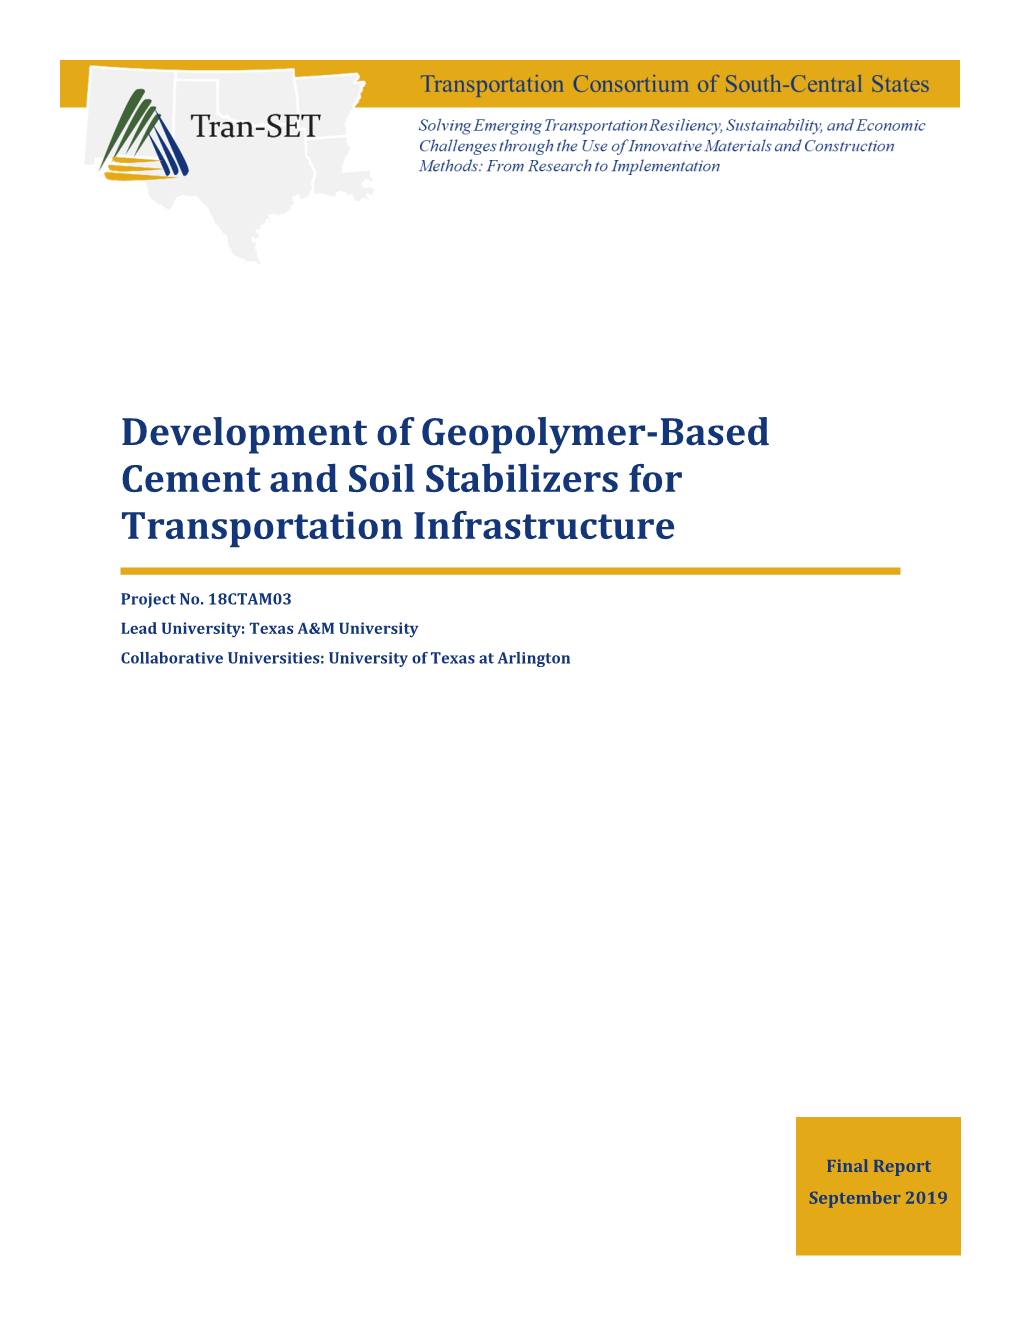 Development of Geopolymer-Based Cement and Soil Stabilizers for Transportation Infrastructure